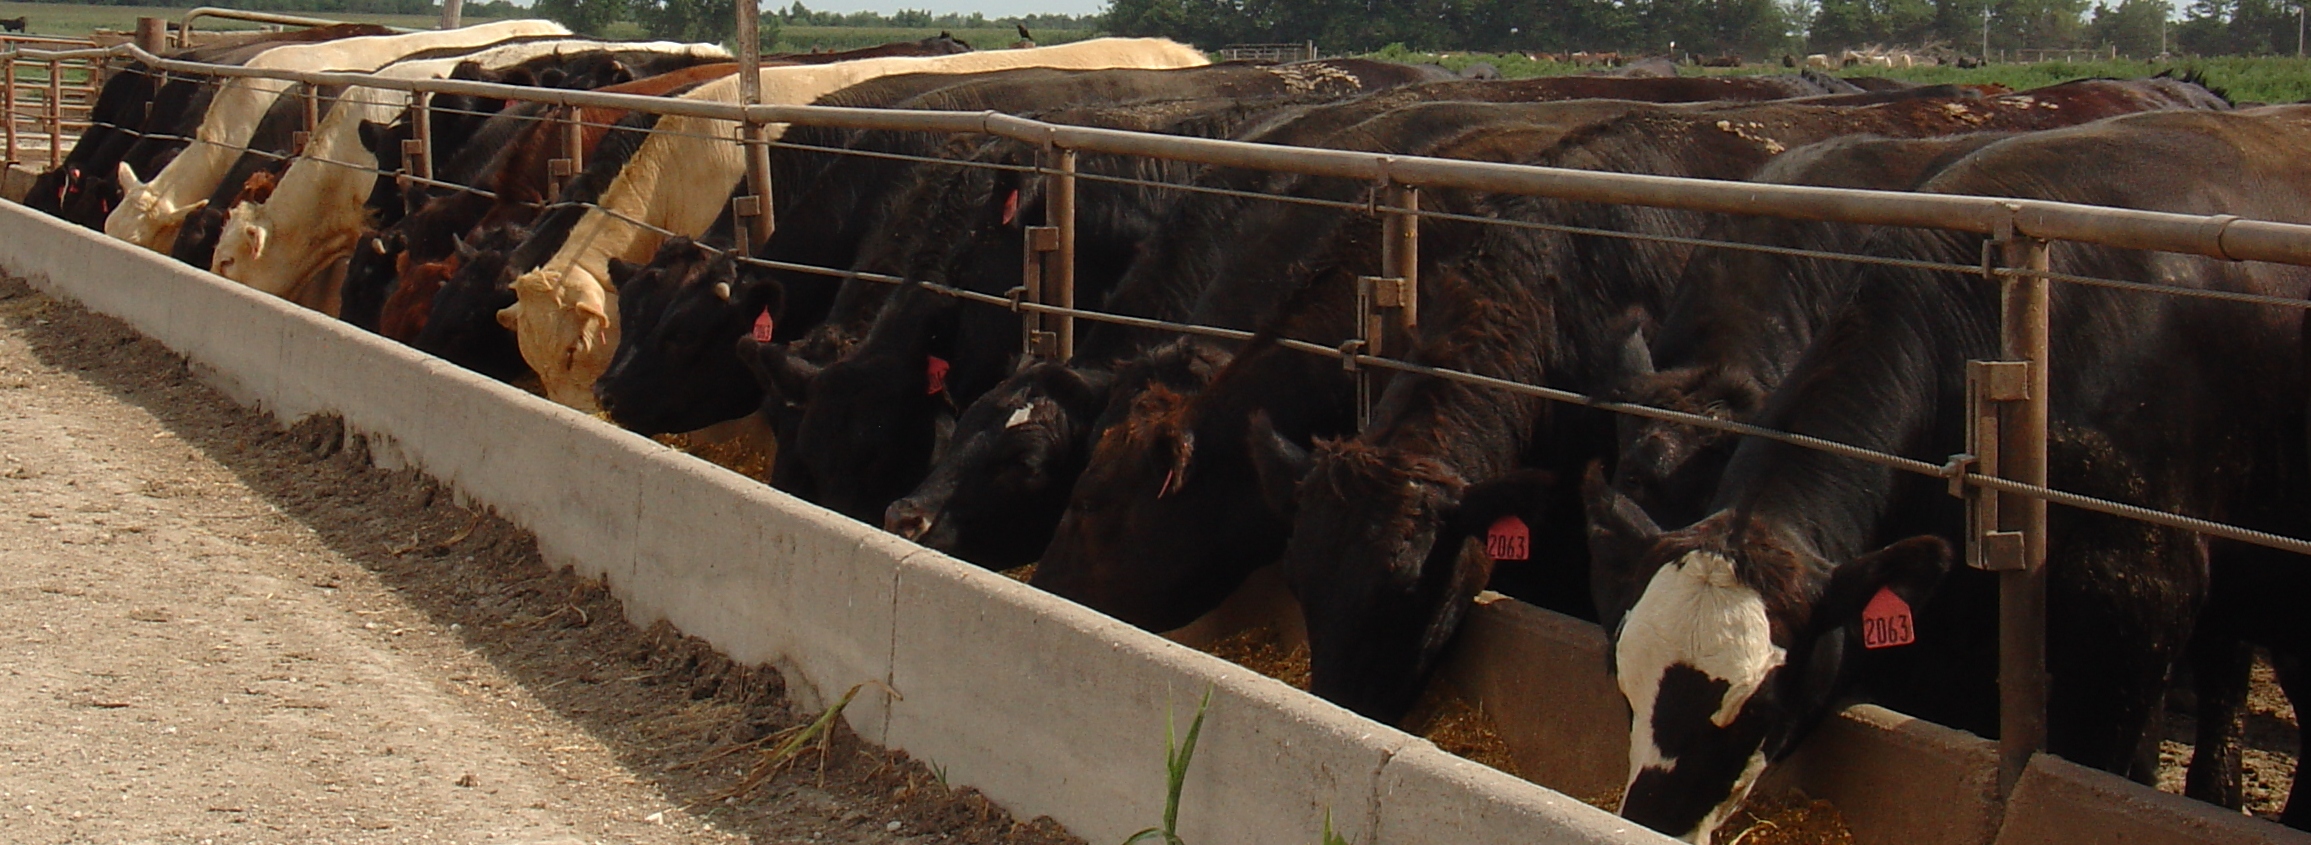 Cattle on Feed Report exceeds analyst expectations | Iowa ...